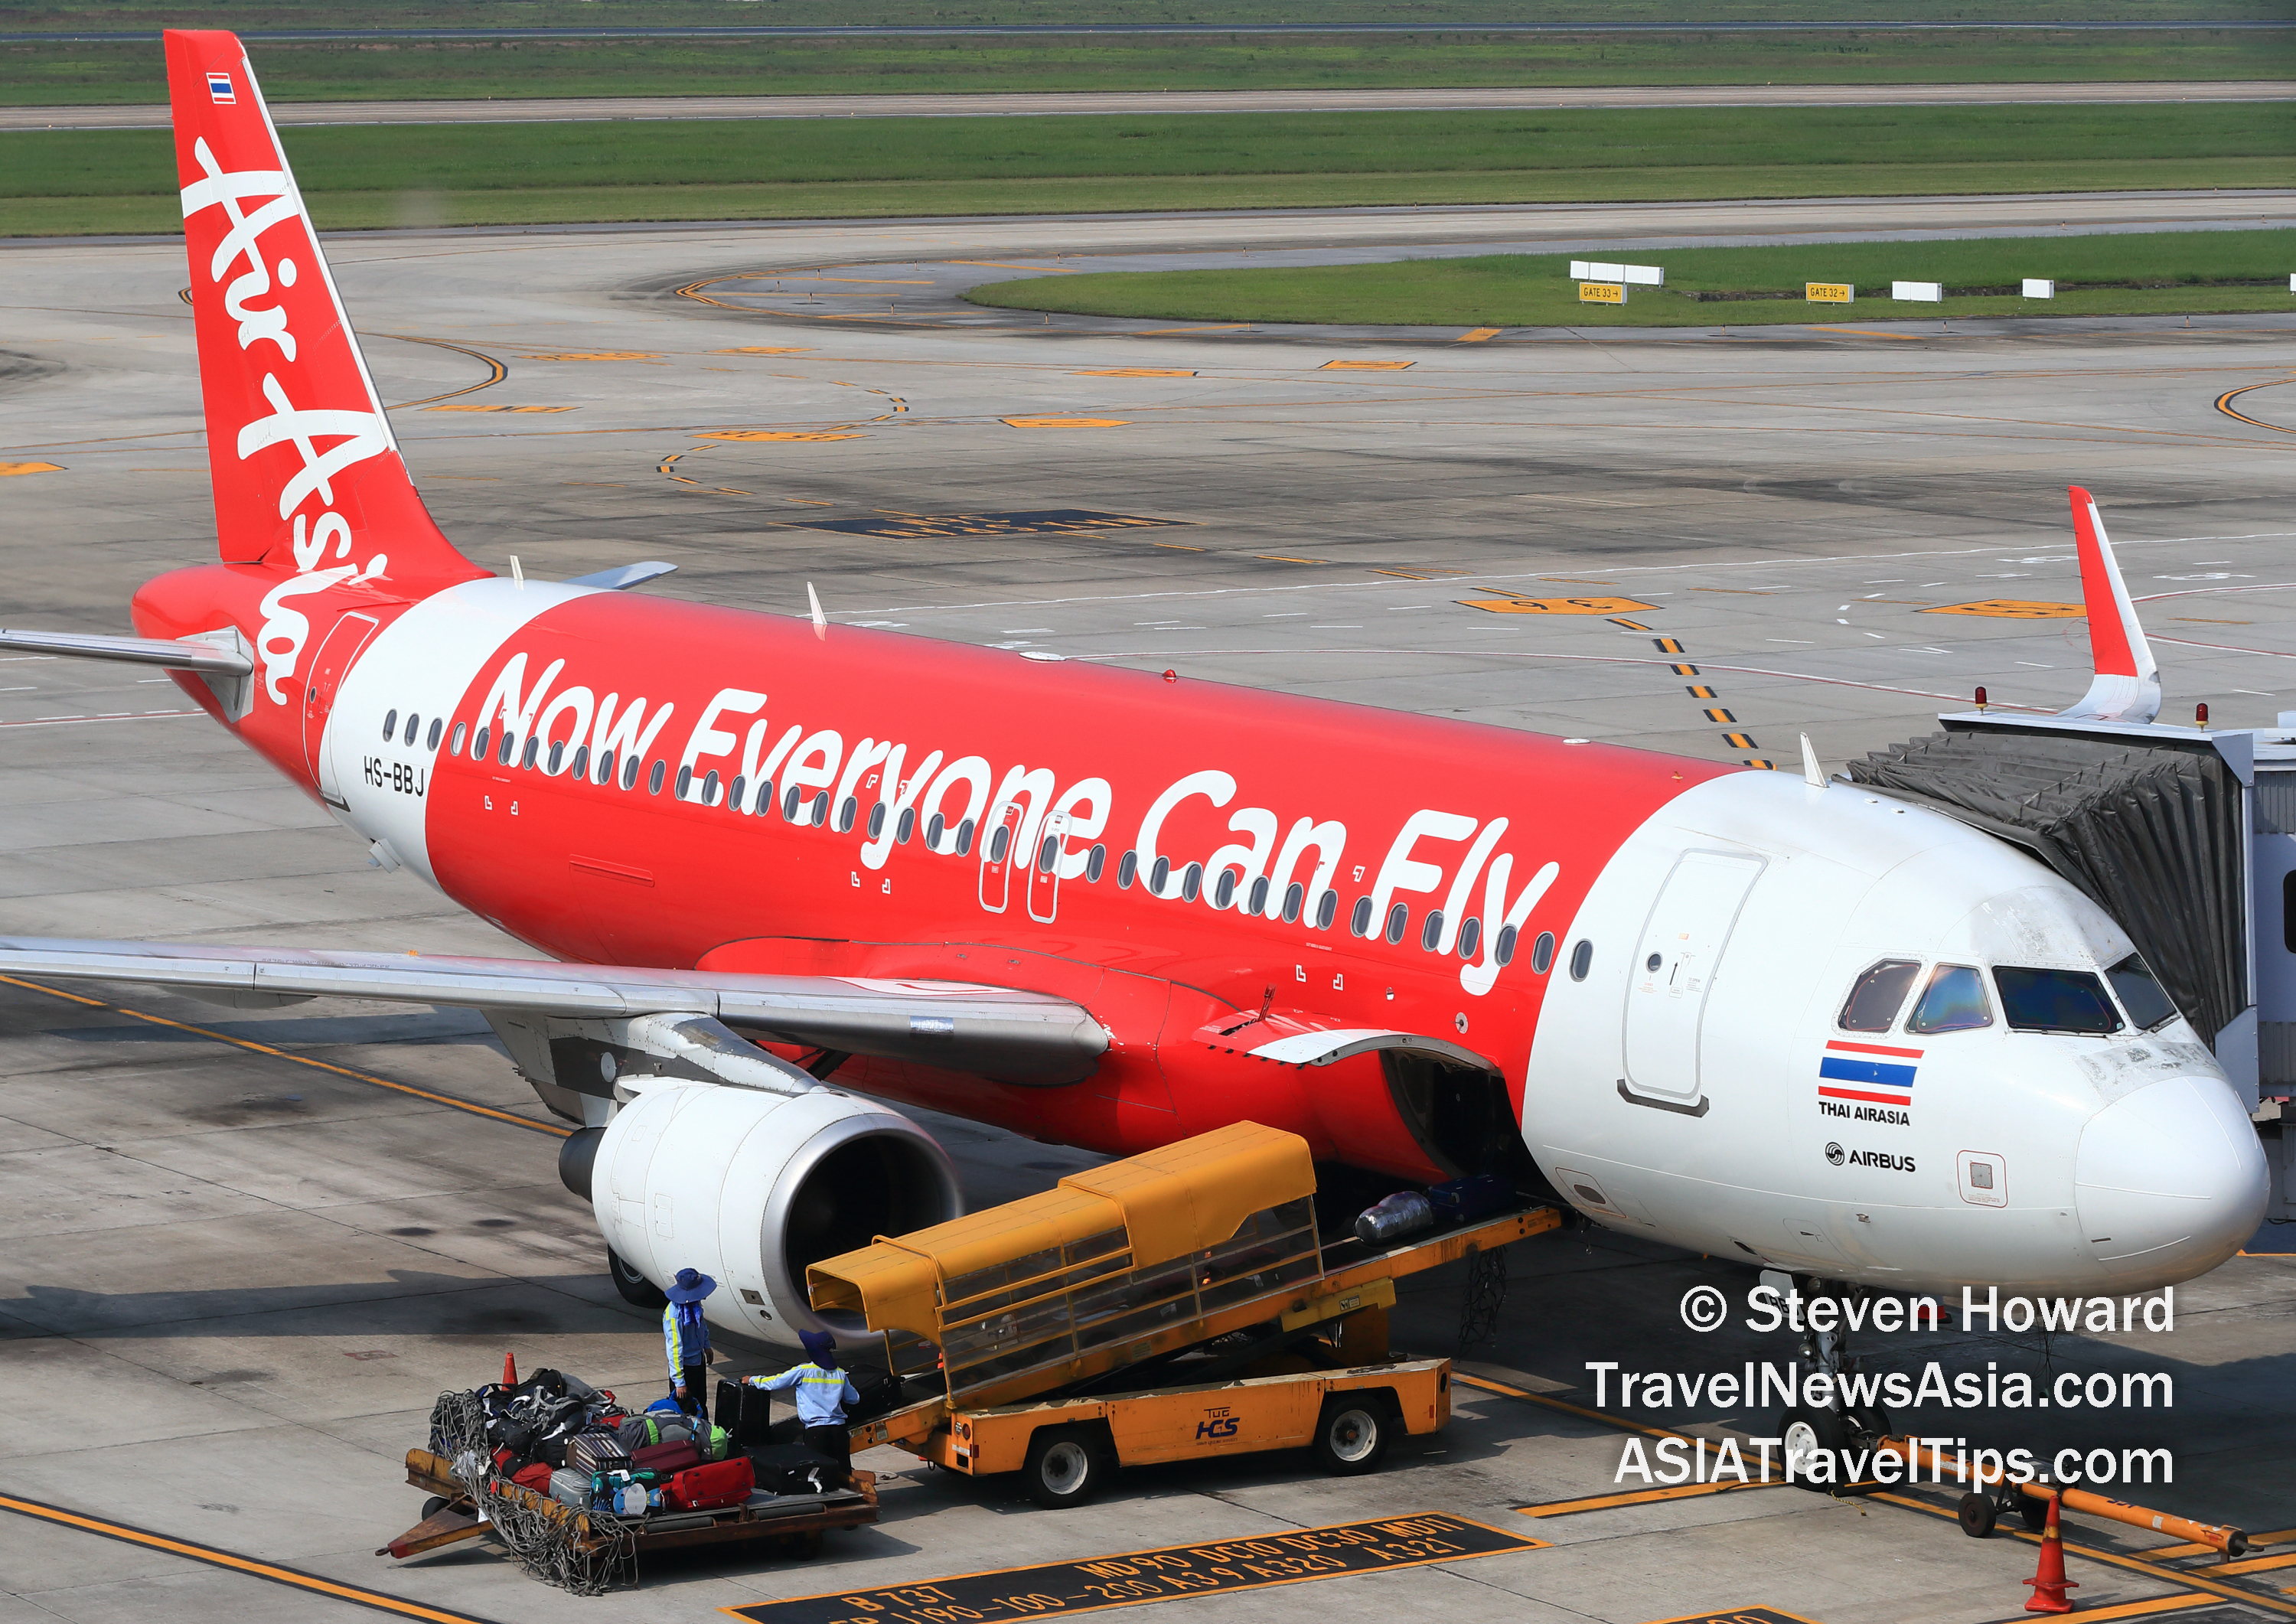 Thai AirAsia Airbus A320. Picture by Steven Howard of TravelNewsAsia.com Click to enlarge.